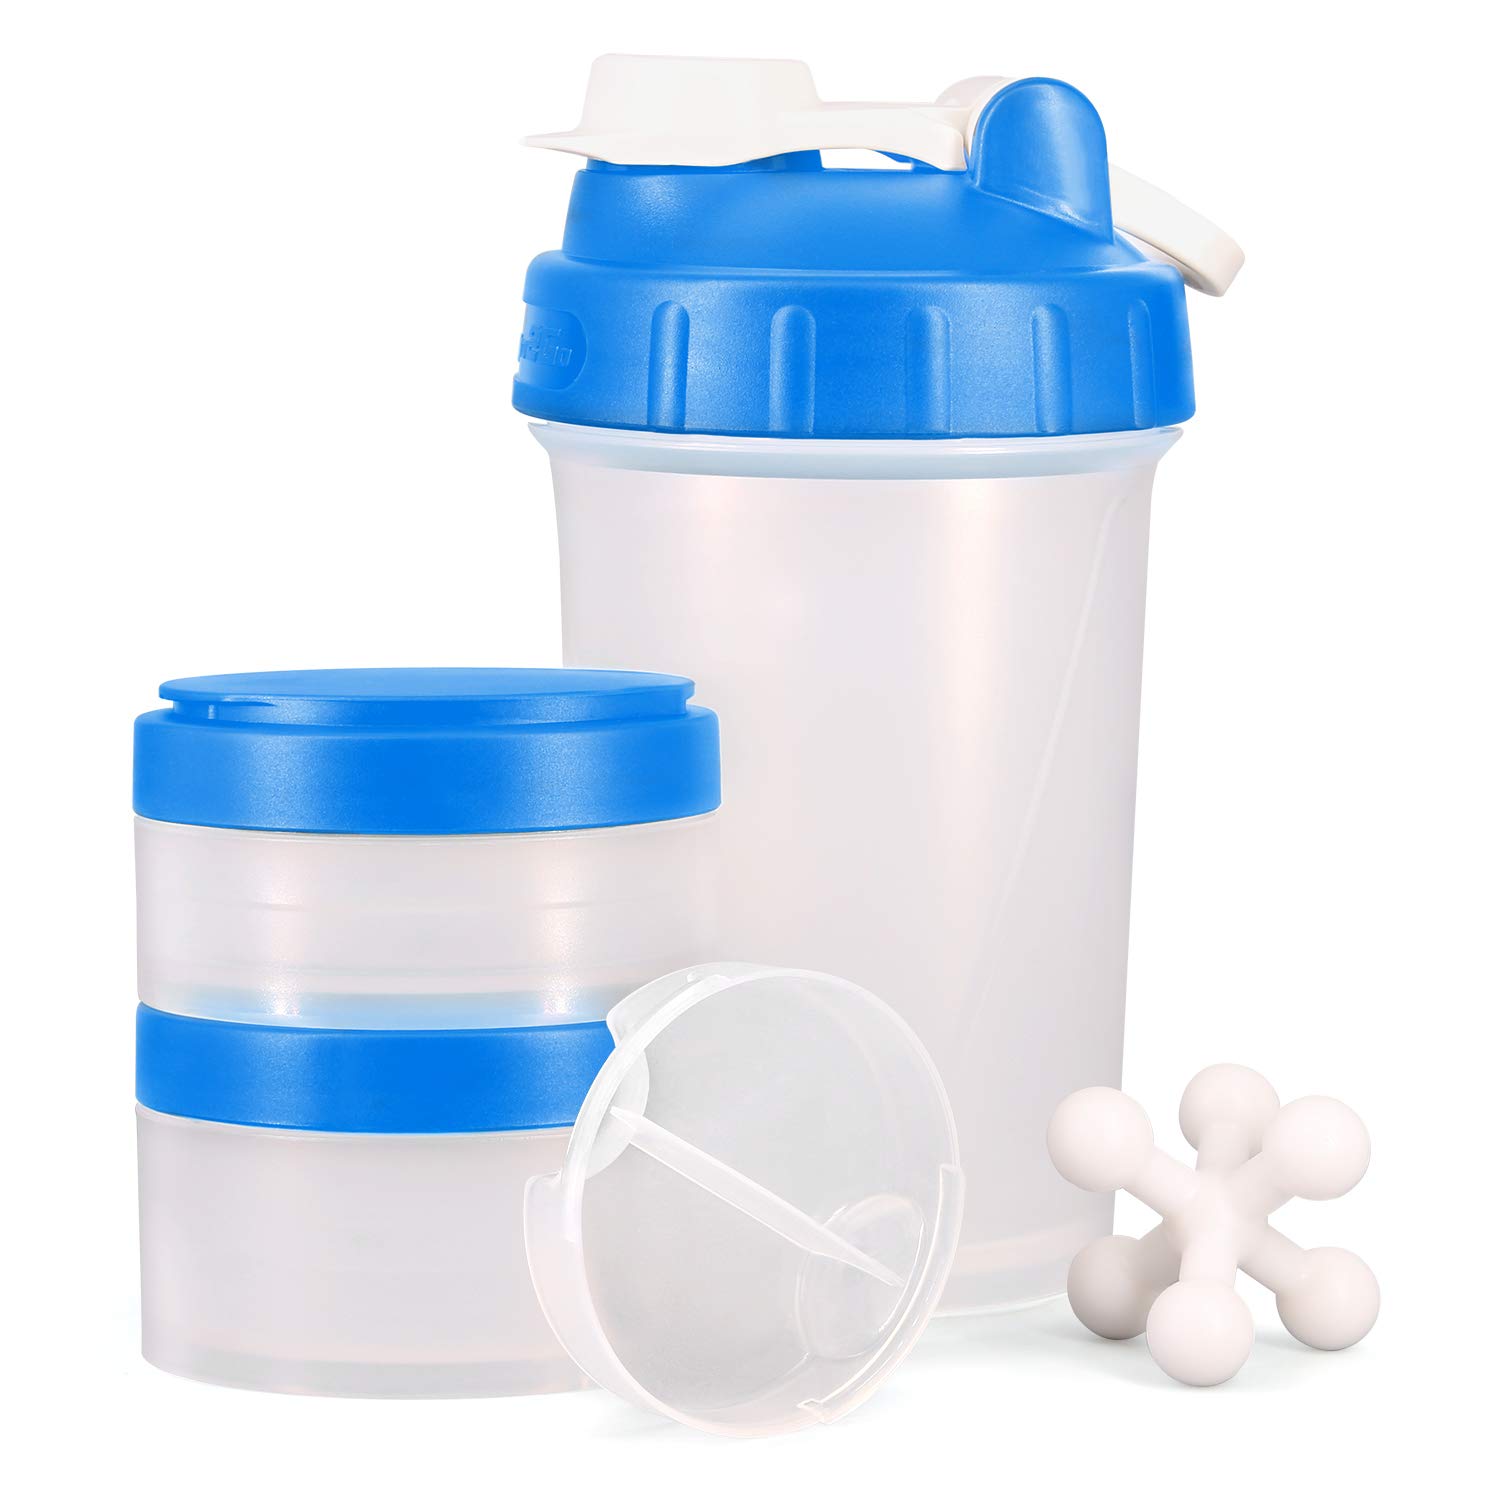 Hydro2Go 16 OZ Protein Workout Shaker Bottle with Mixer Ball and 2 close-connected Storage Jars for Pills, Snacks, Coffee, Tea. 100% BPA-Free, Non Toxic and Leak Proof Sports Bottle